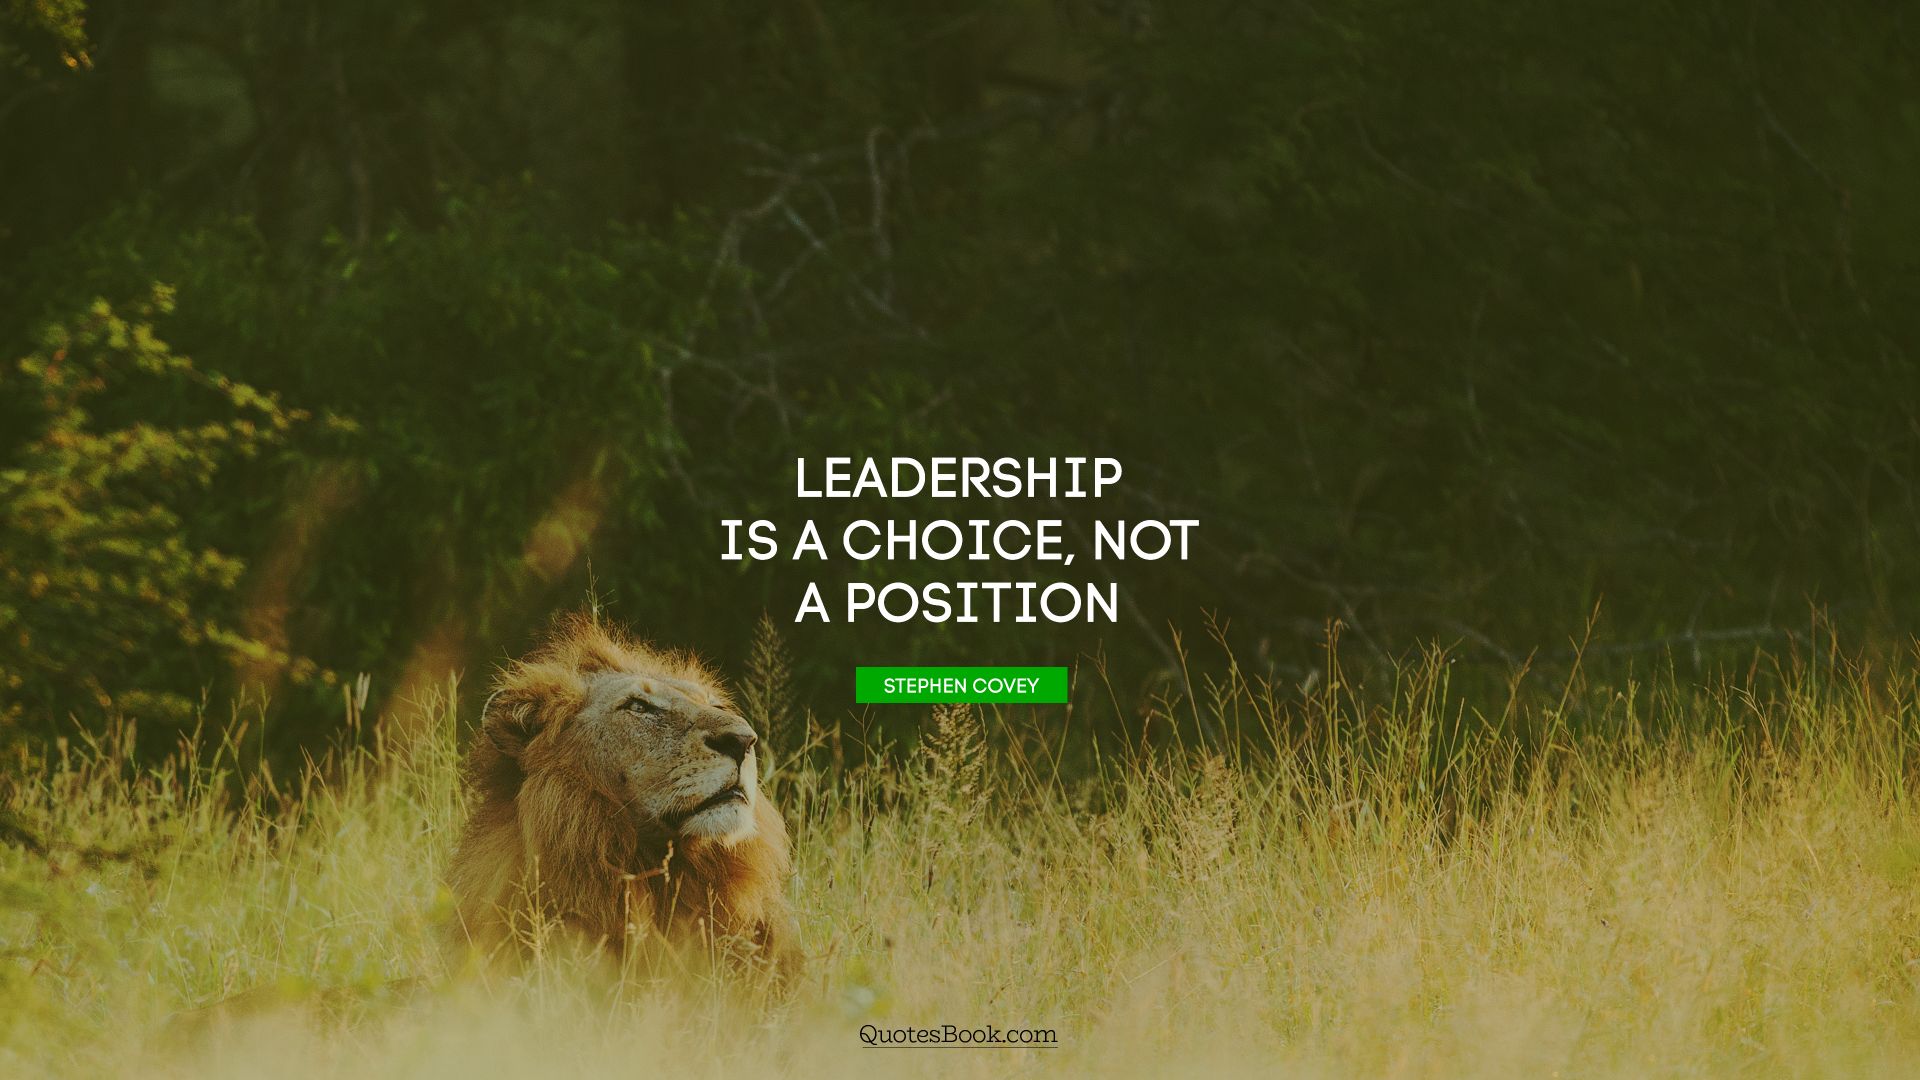 Leadership is a choice, not a position. - Quote by Stephen Covey